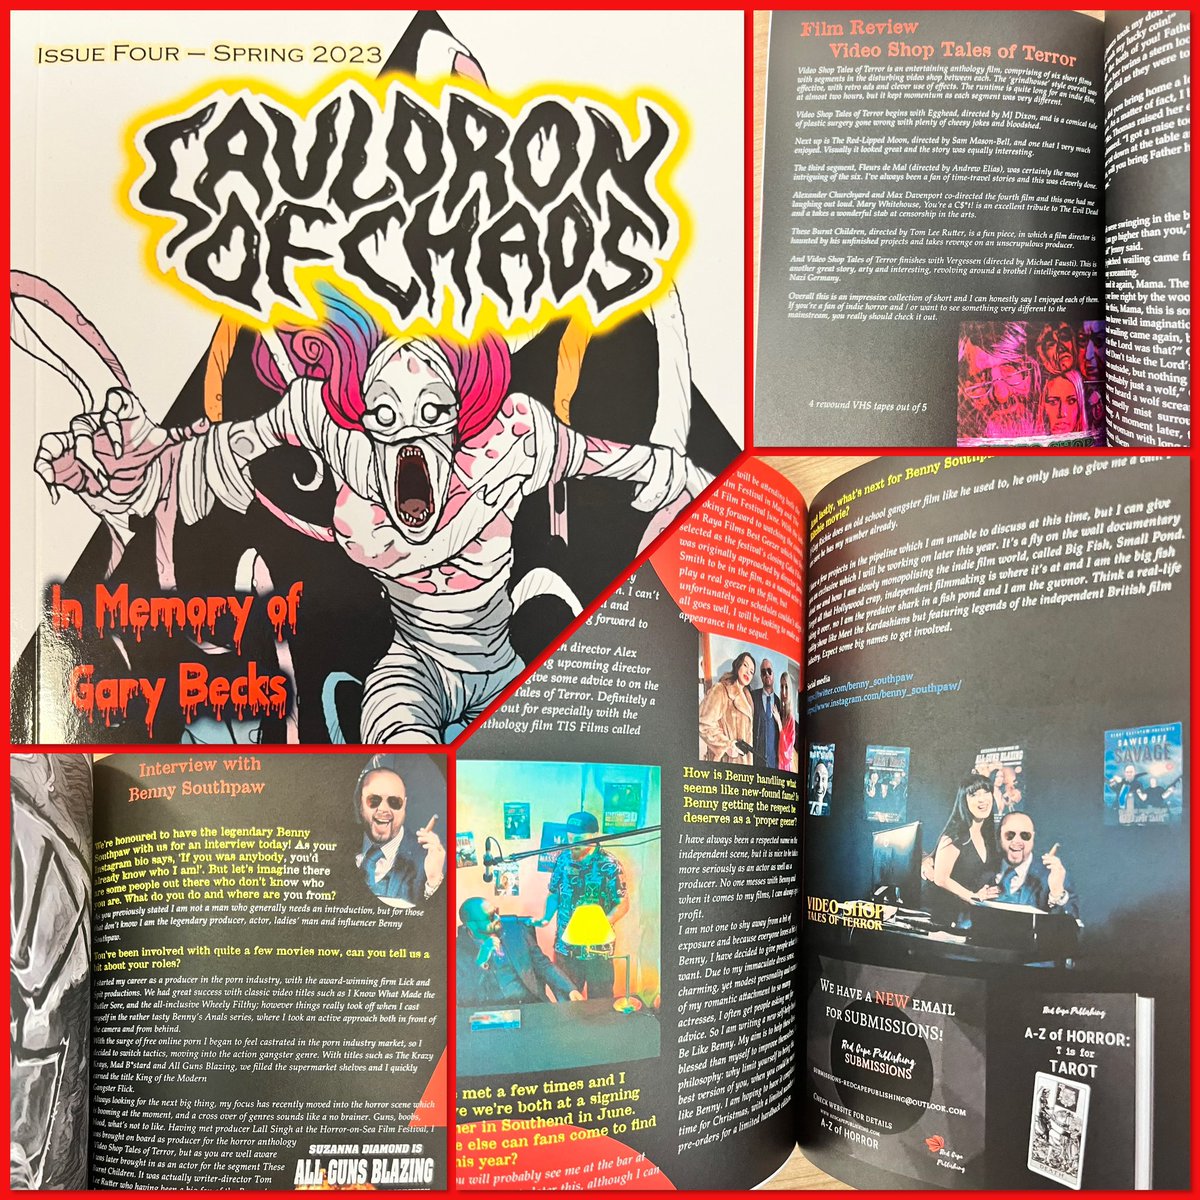 ‘Cauldron of Chaos’ issue 4 from @RedCapePublish includes an interview with me,  a cracking review of my film ‘Video Shop Tales of Terror’ & some other bits

Digital
godless.com/products/cauld… 

Print
mybook.to/CoC4

#spreadthehorror #SharetheScreams #rtArtBoost